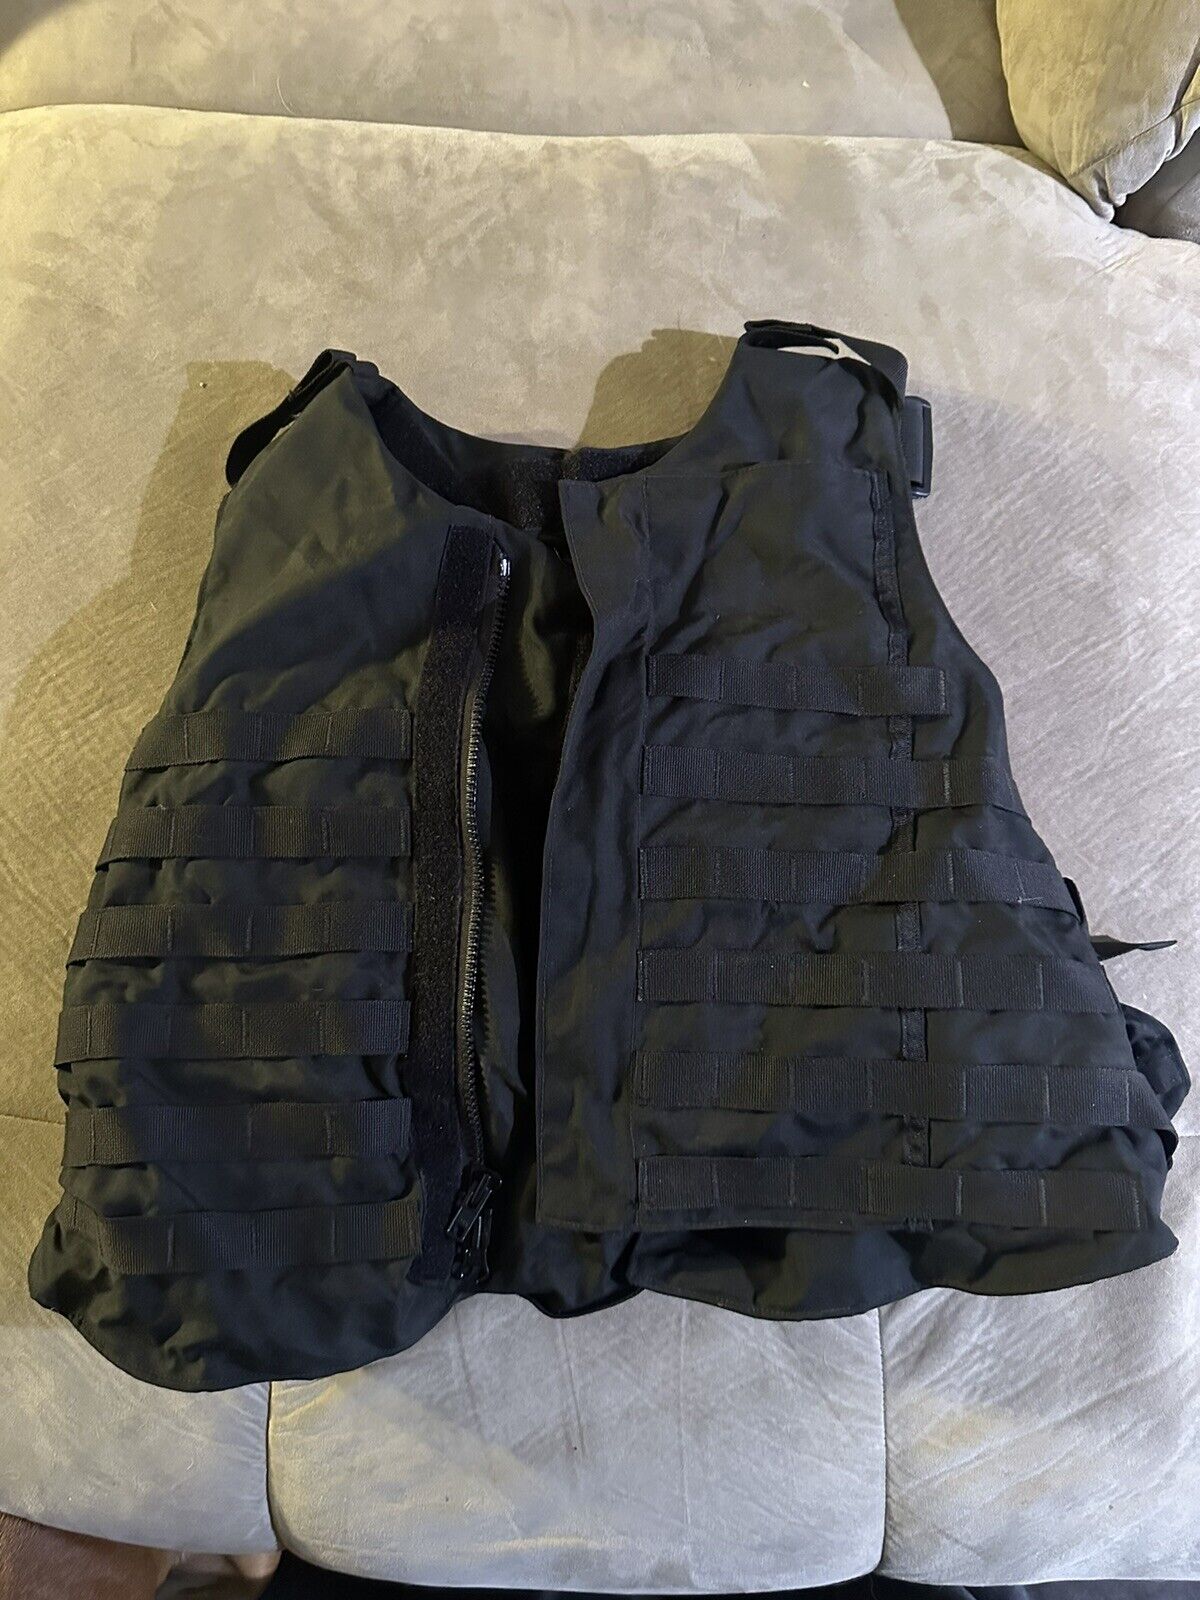 POINT BLANK BODY ARMOR CARRIER NO INSERTS OUTER VEST BLACK LARGE Regular